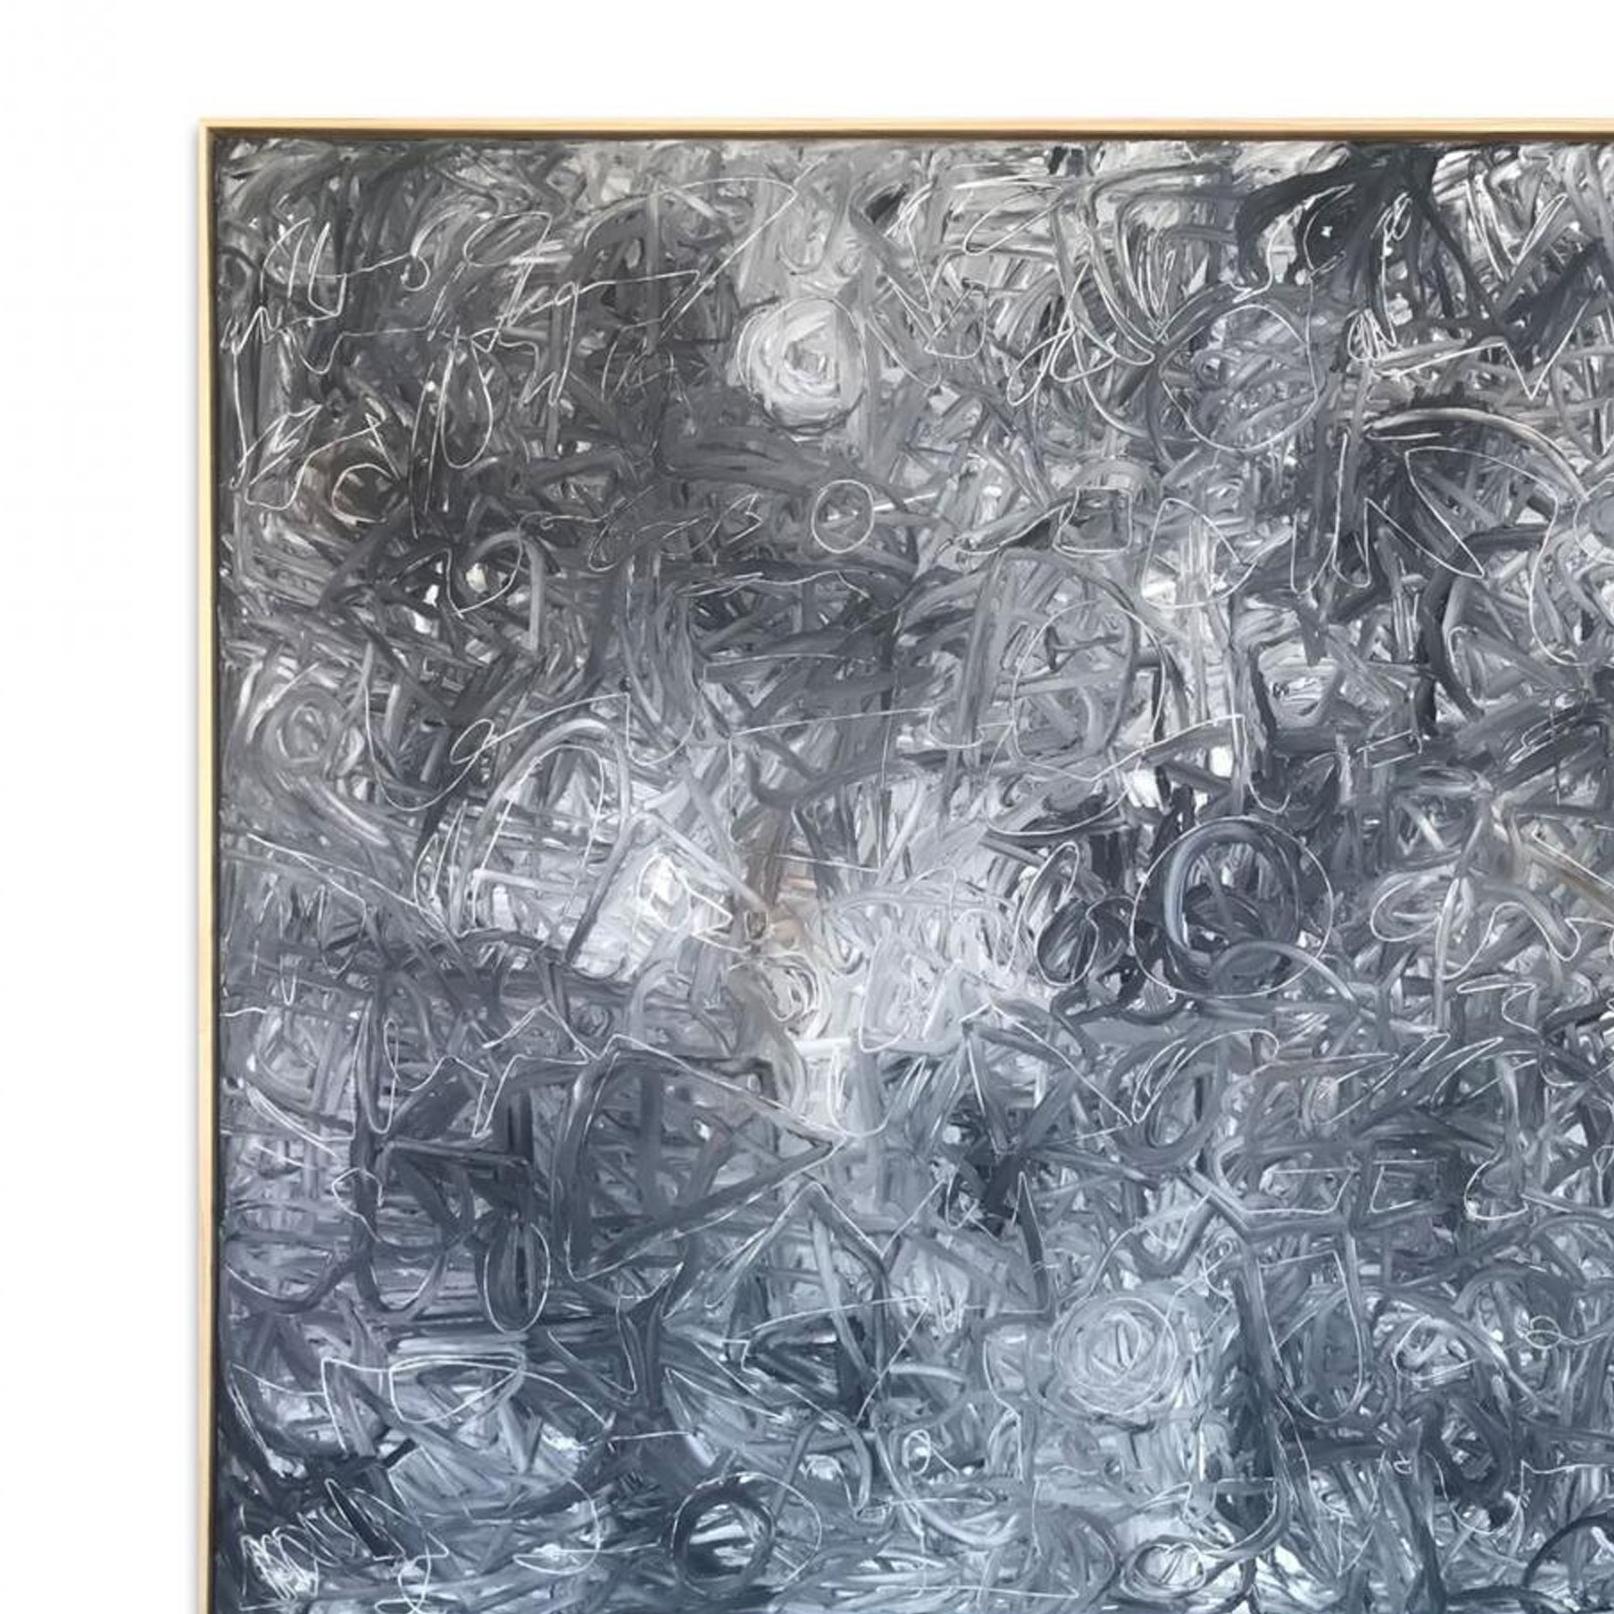 UNTITLED XIX by McKenzie Dove is a oil on canvas with natural wood frame, measuring 61.50 X 73.50 and is priced at $5,700.00.

McKenzie Dove was born in Dallas, TX but now resides in Birmingham, AL with her husband. Her work consists of pure oil